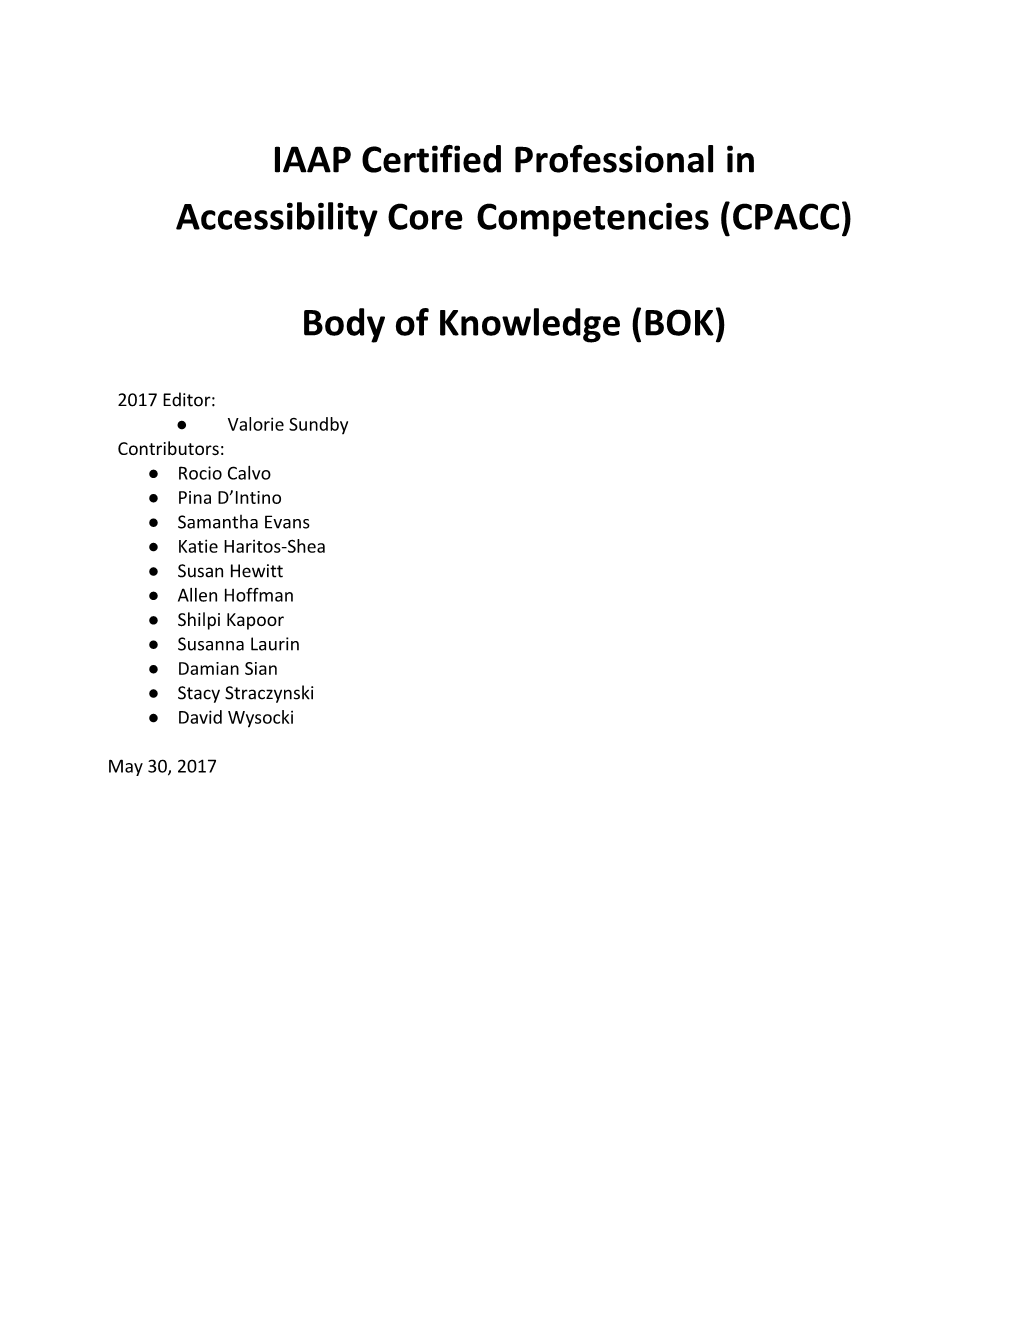 IAAP CPACC Book of Knowledge 20170411